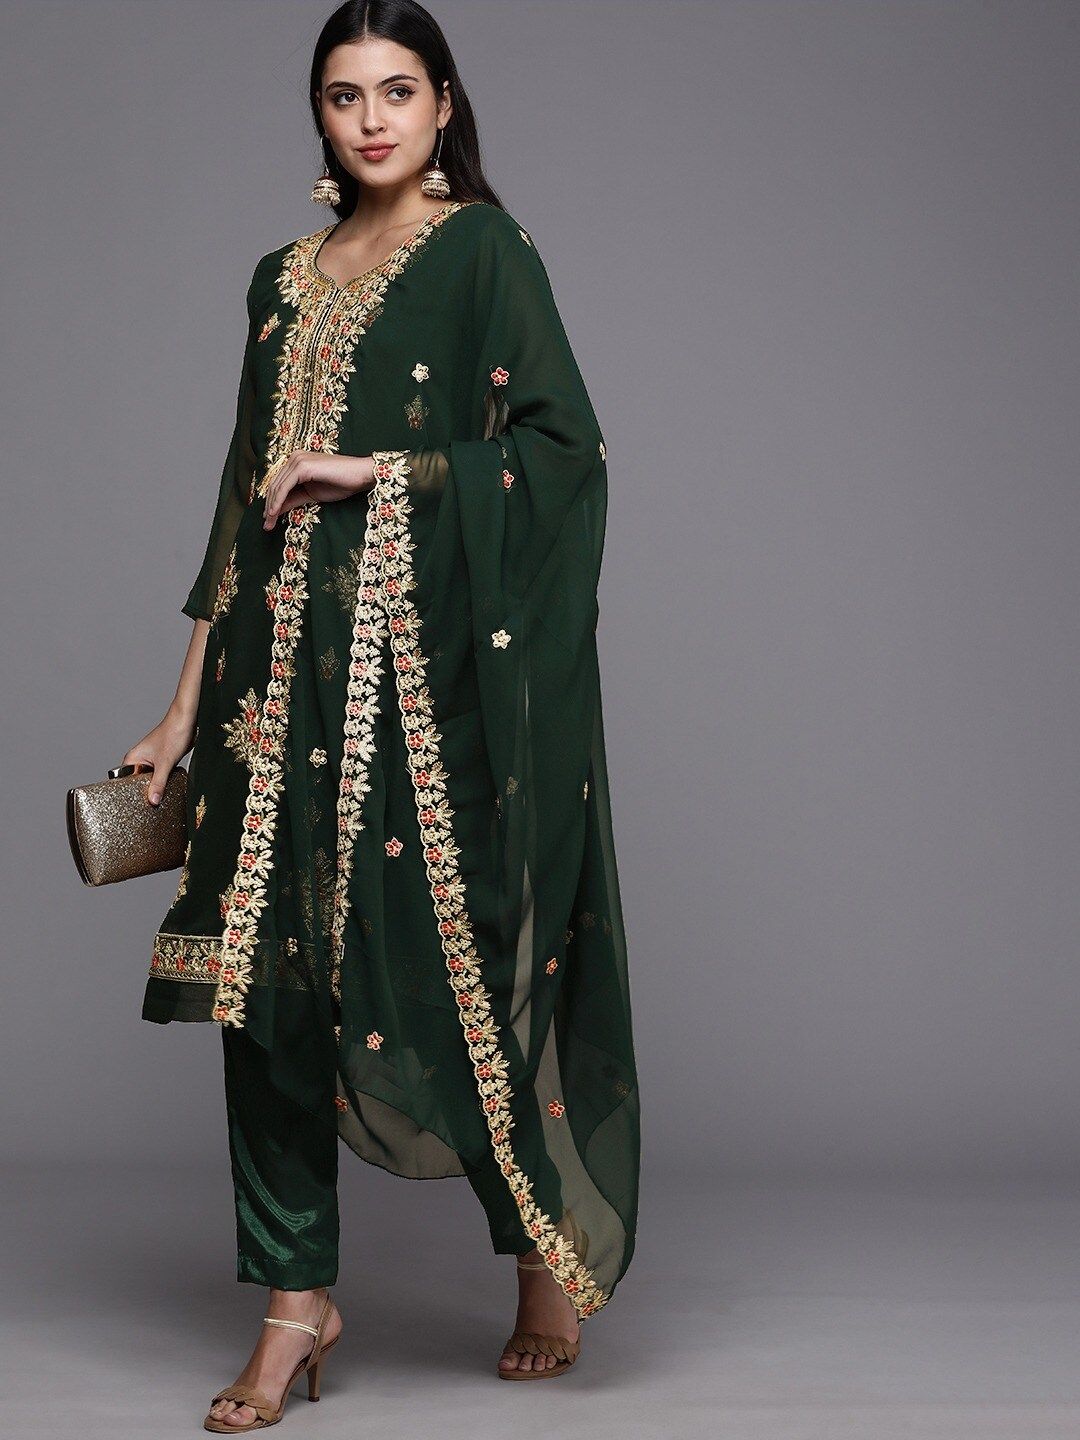 KALINI Green & Gold-Toned Embroidered Unstitched Dress Material Price in India